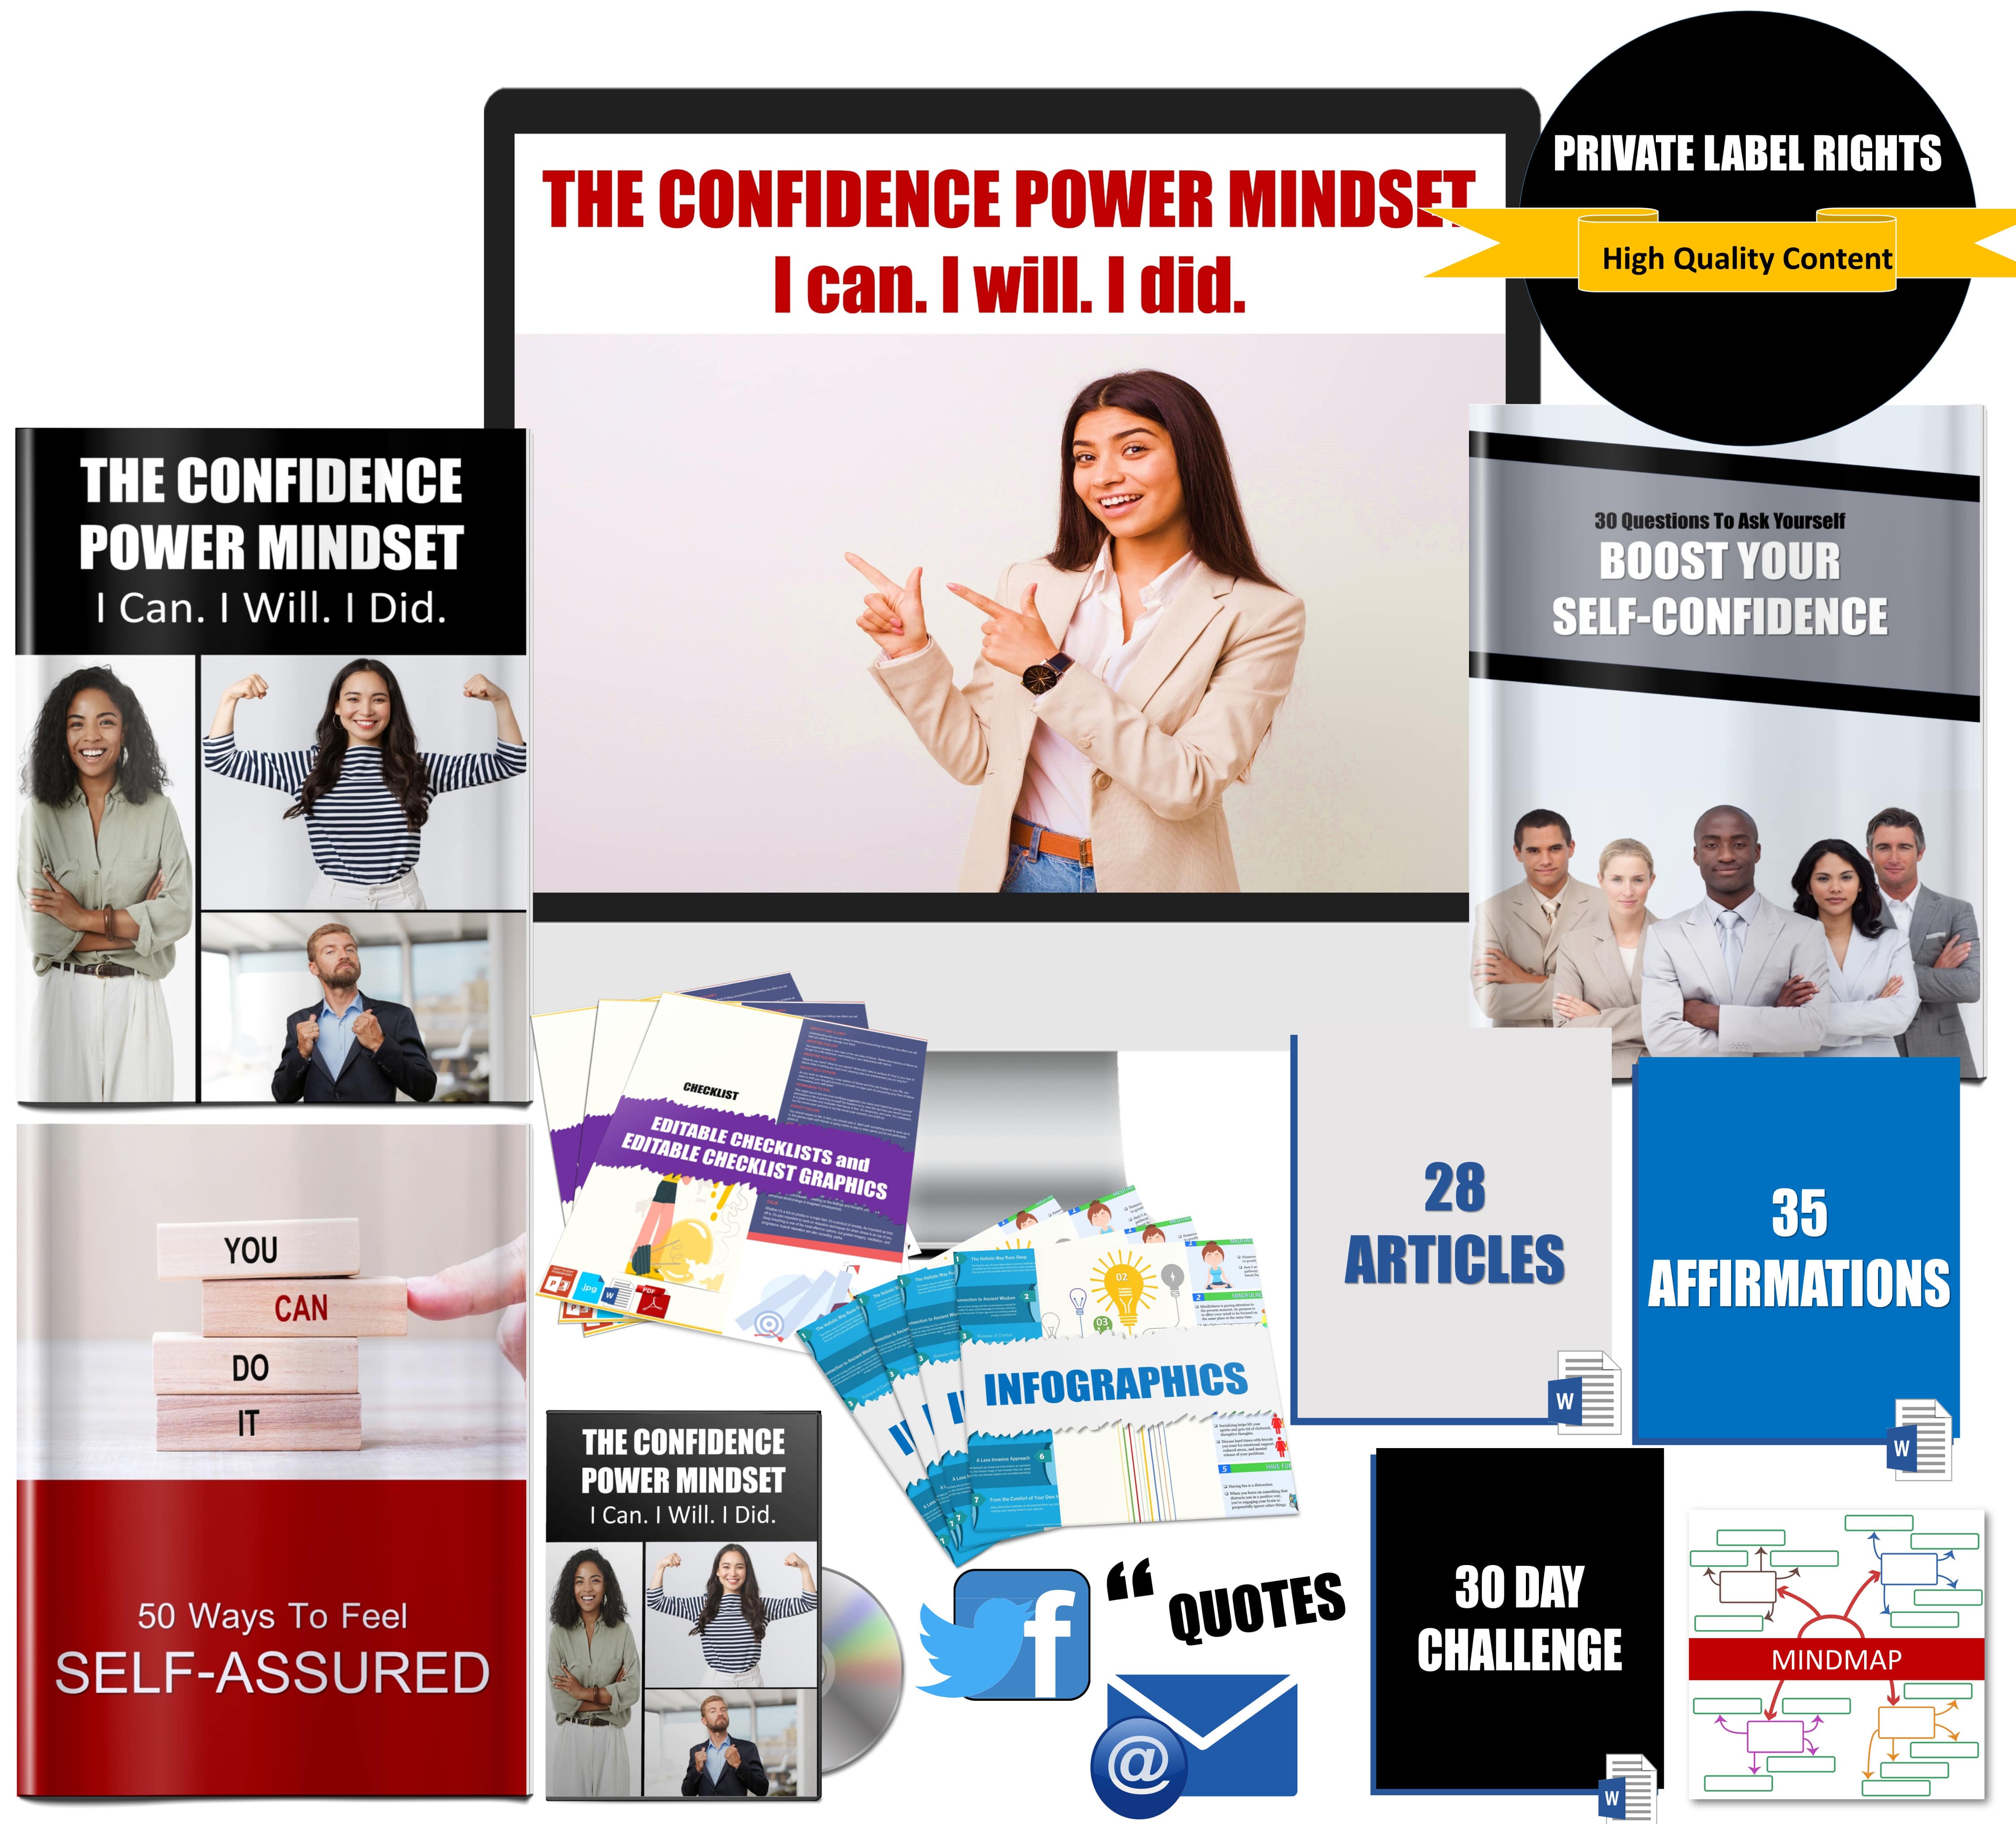 The Confidence Power Mindset: I Can. I Will. I Did. Giant Content Pack PLR Rights